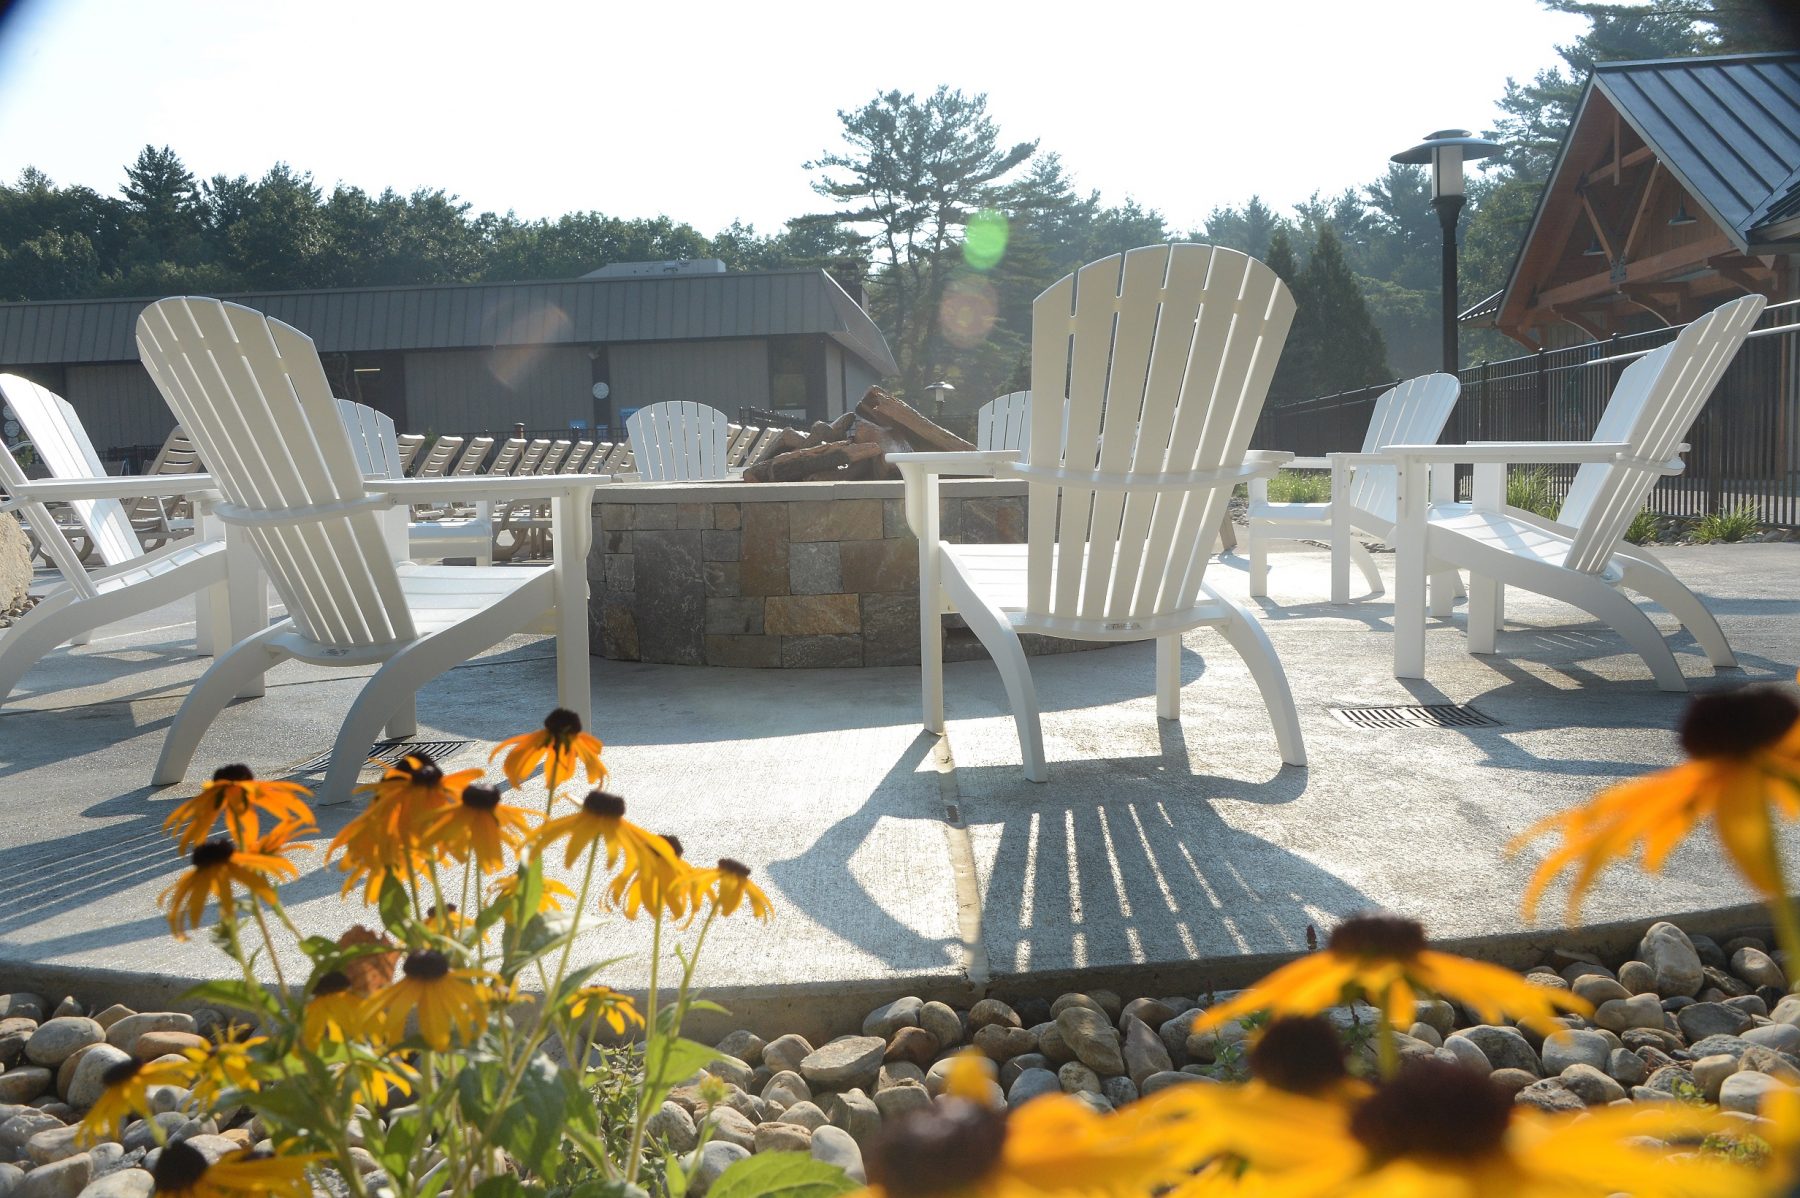 In this photo there is adirondack chairs surrounding a stone fire pit. Wood is stacked in the fire pit for the fire. Surrounding this area there are stones and flowers.